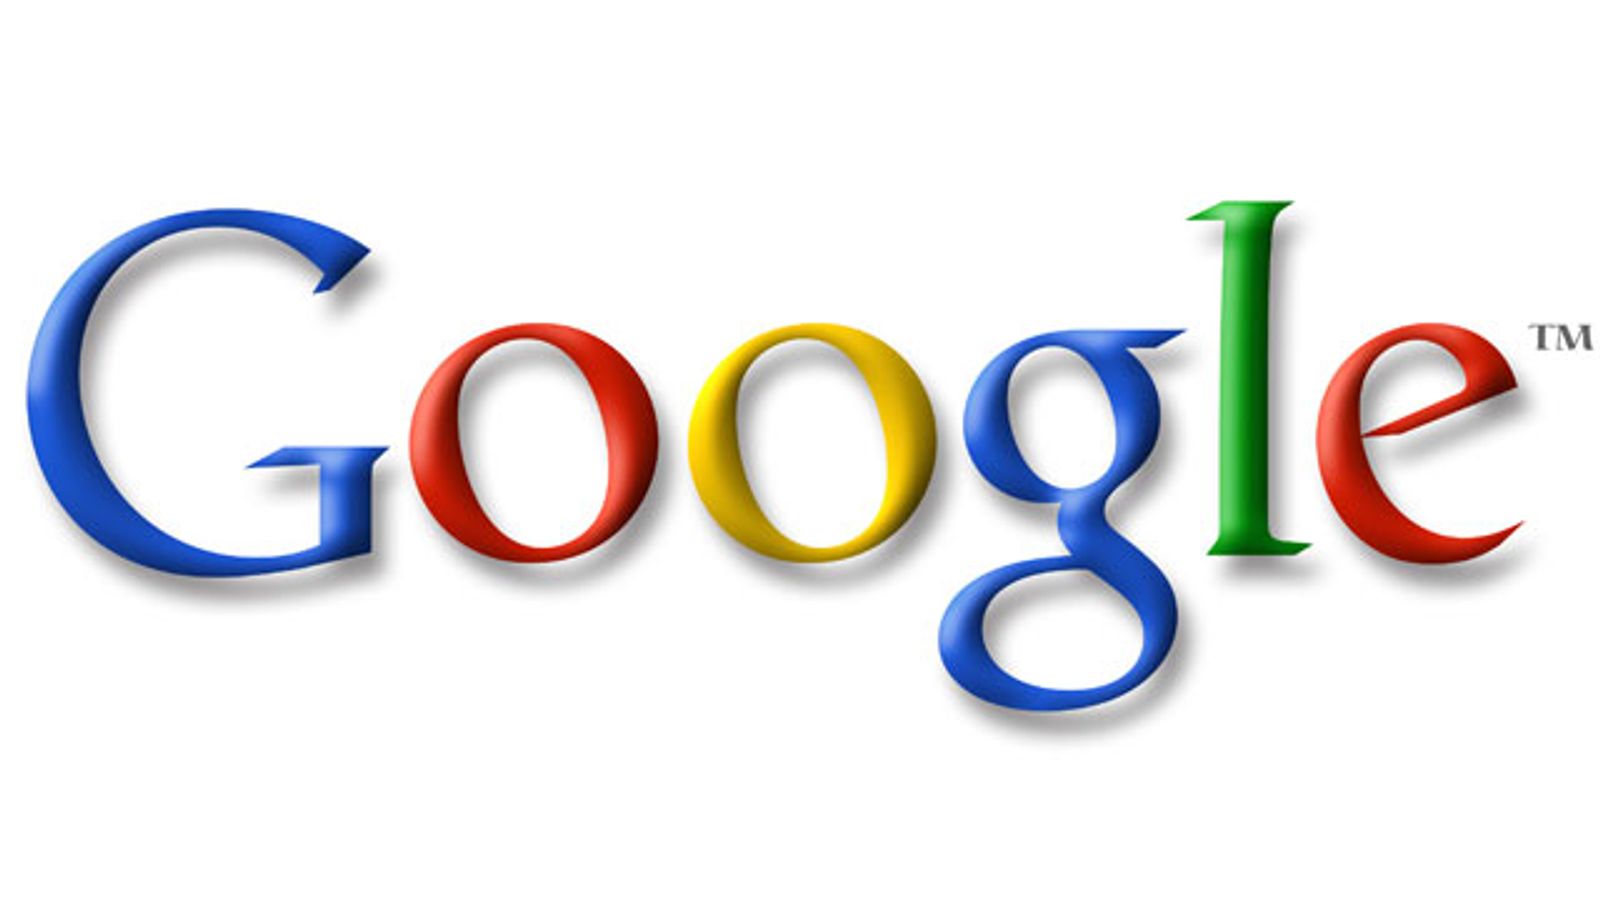 Will Google's Search Result 'Pirate Penalty' Be Enforced Fairly?